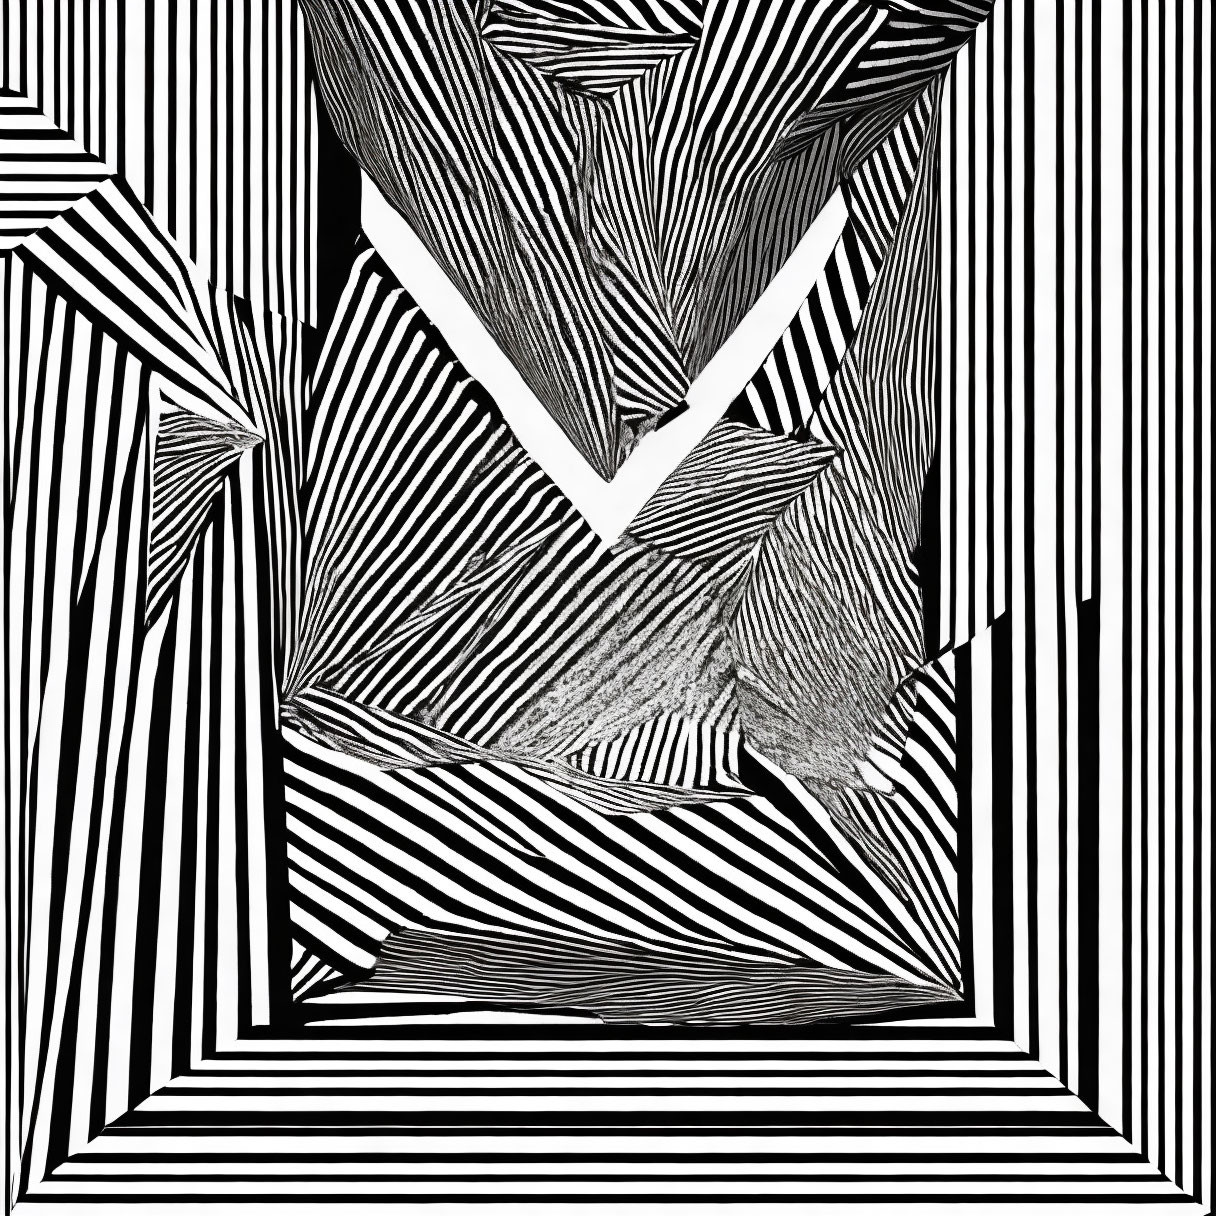 Abstract monochrome optical art with distorted checkmark and striped patterns creating tunnel illusion